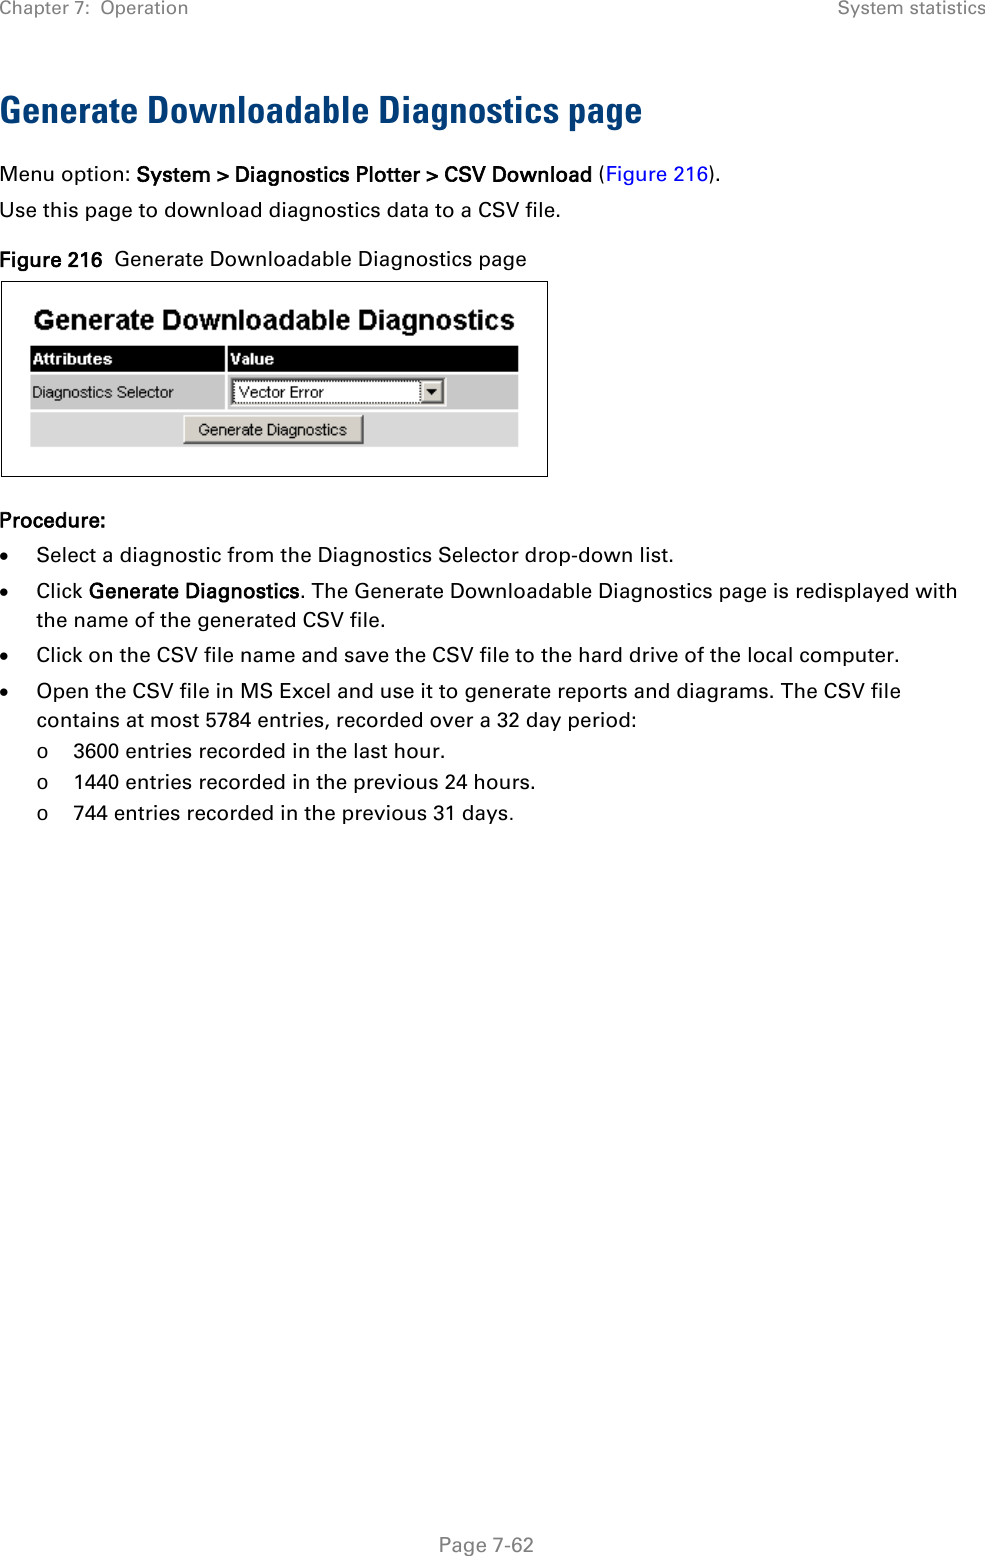 Chapter 7:  Operation System statistics  Generate Downloadable Diagnostics page Menu option: System &gt; Diagnostics Plotter &gt; CSV Download (Figure 216). Use this page to download diagnostics data to a CSV file. Figure 216  Generate Downloadable Diagnostics page  Procedure: • Select a diagnostic from the Diagnostics Selector drop-down list. • Click Generate Diagnostics. The Generate Downloadable Diagnostics page is redisplayed with the name of the generated CSV file. • Click on the CSV file name and save the CSV file to the hard drive of the local computer. • Open the CSV file in MS Excel and use it to generate reports and diagrams. The CSV file contains at most 5784 entries, recorded over a 32 day period: o 3600 entries recorded in the last hour. o 1440 entries recorded in the previous 24 hours. o 744 entries recorded in the previous 31 days.   Page 7-62 